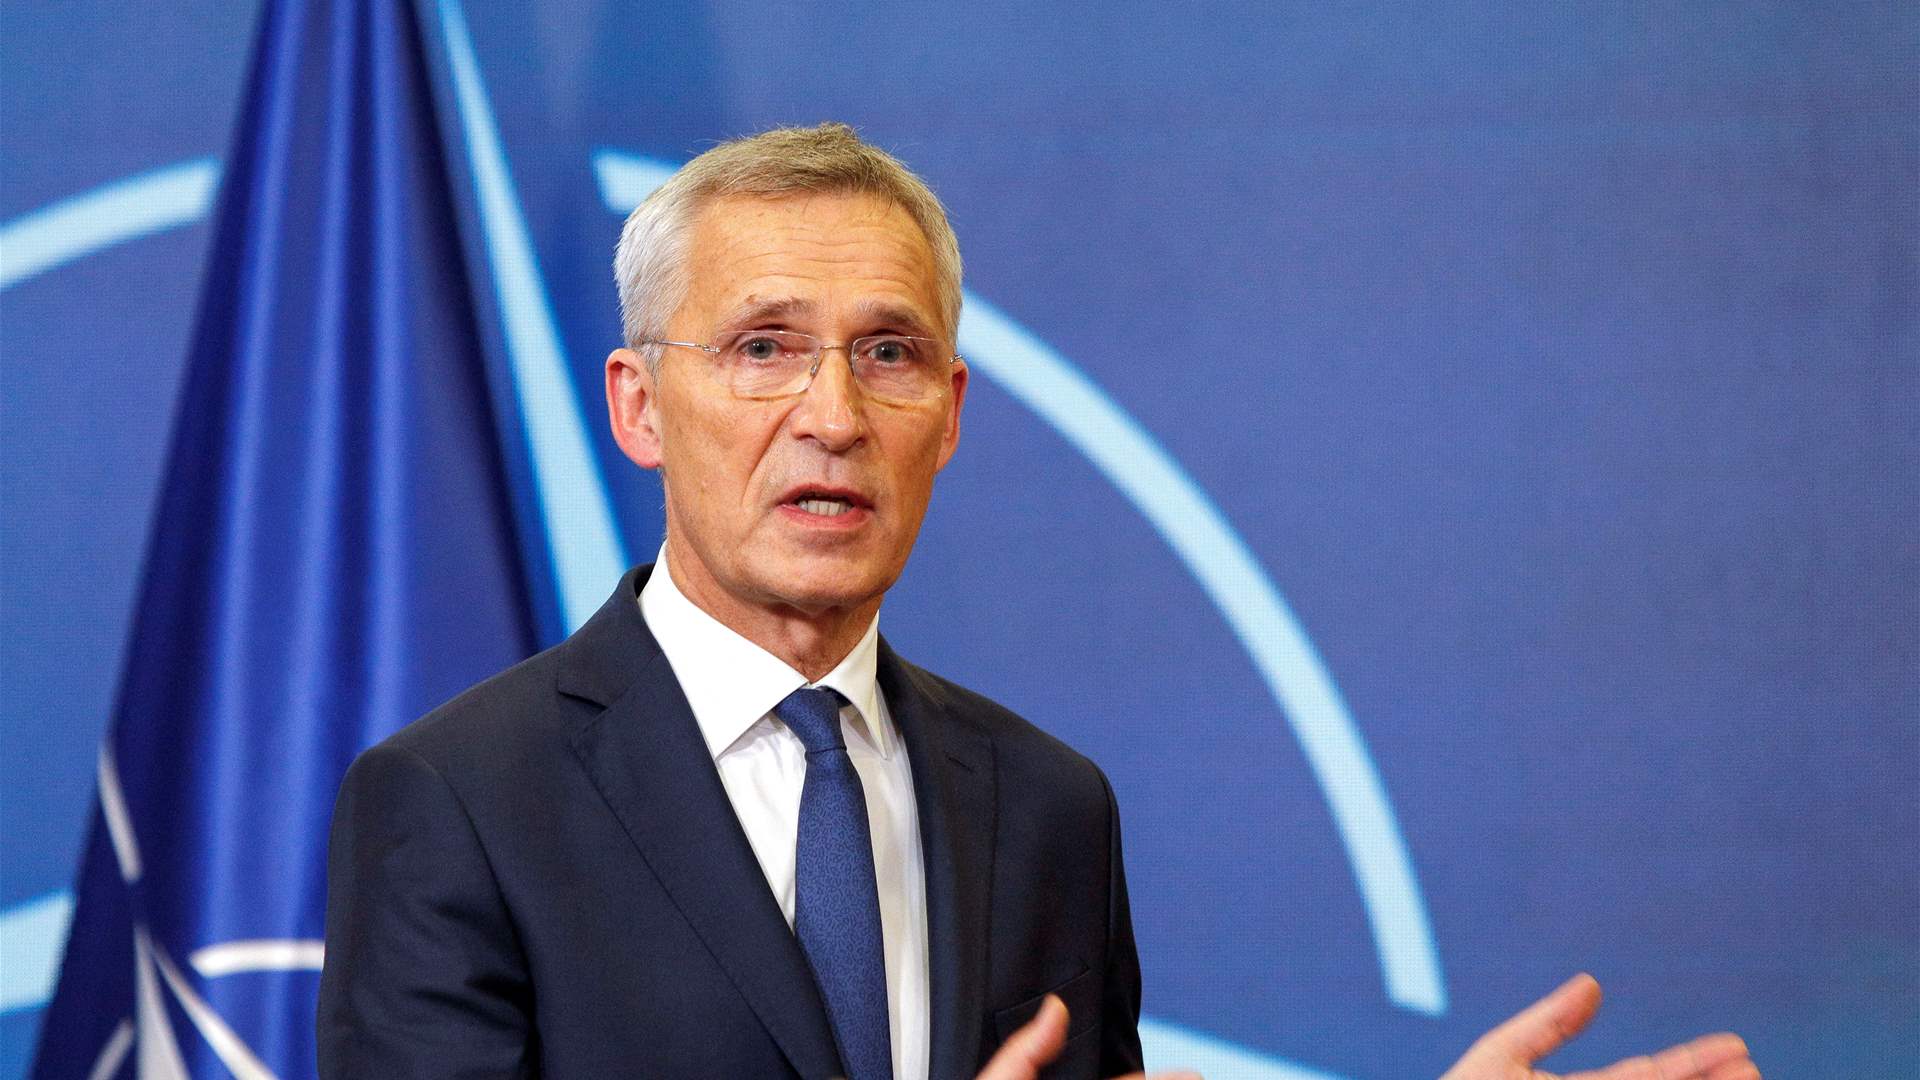 Stoltenberg: Agreement between Russia and North Korea demonstrates mutual support between authoritarian powers